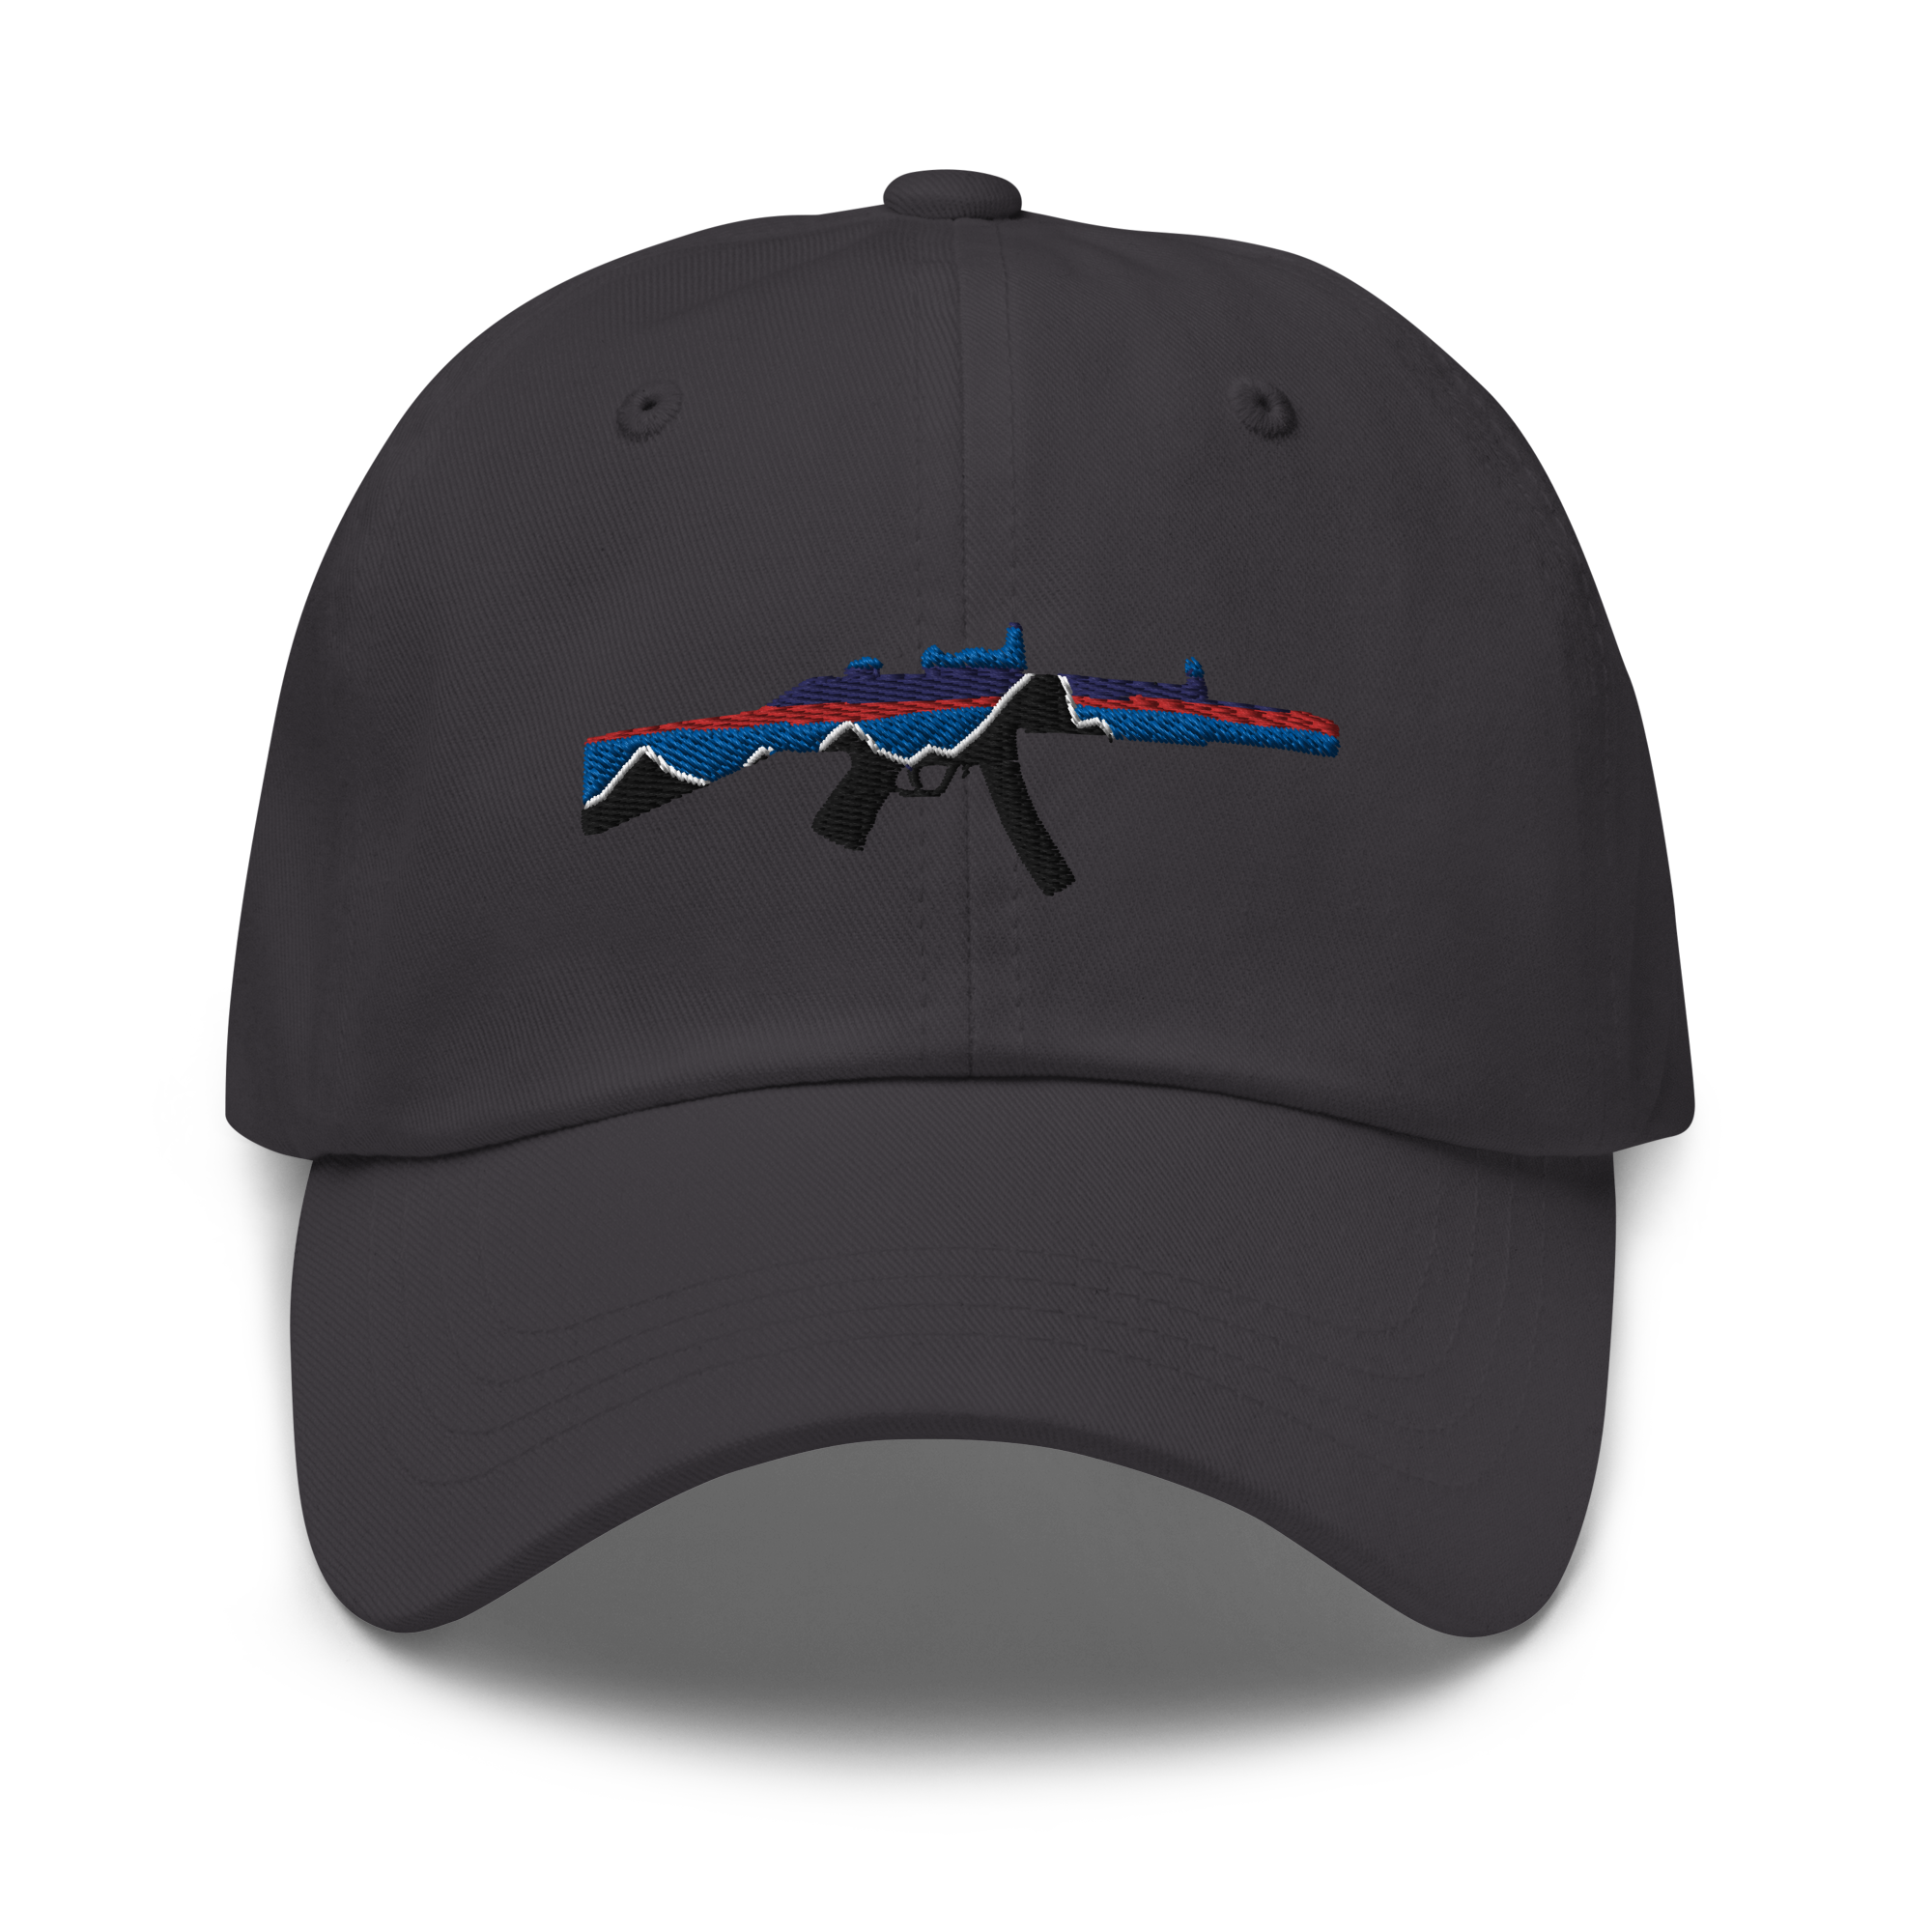 Pata MP5 Dad Hat | Iconic Submachine Gun Style for Daily Wear